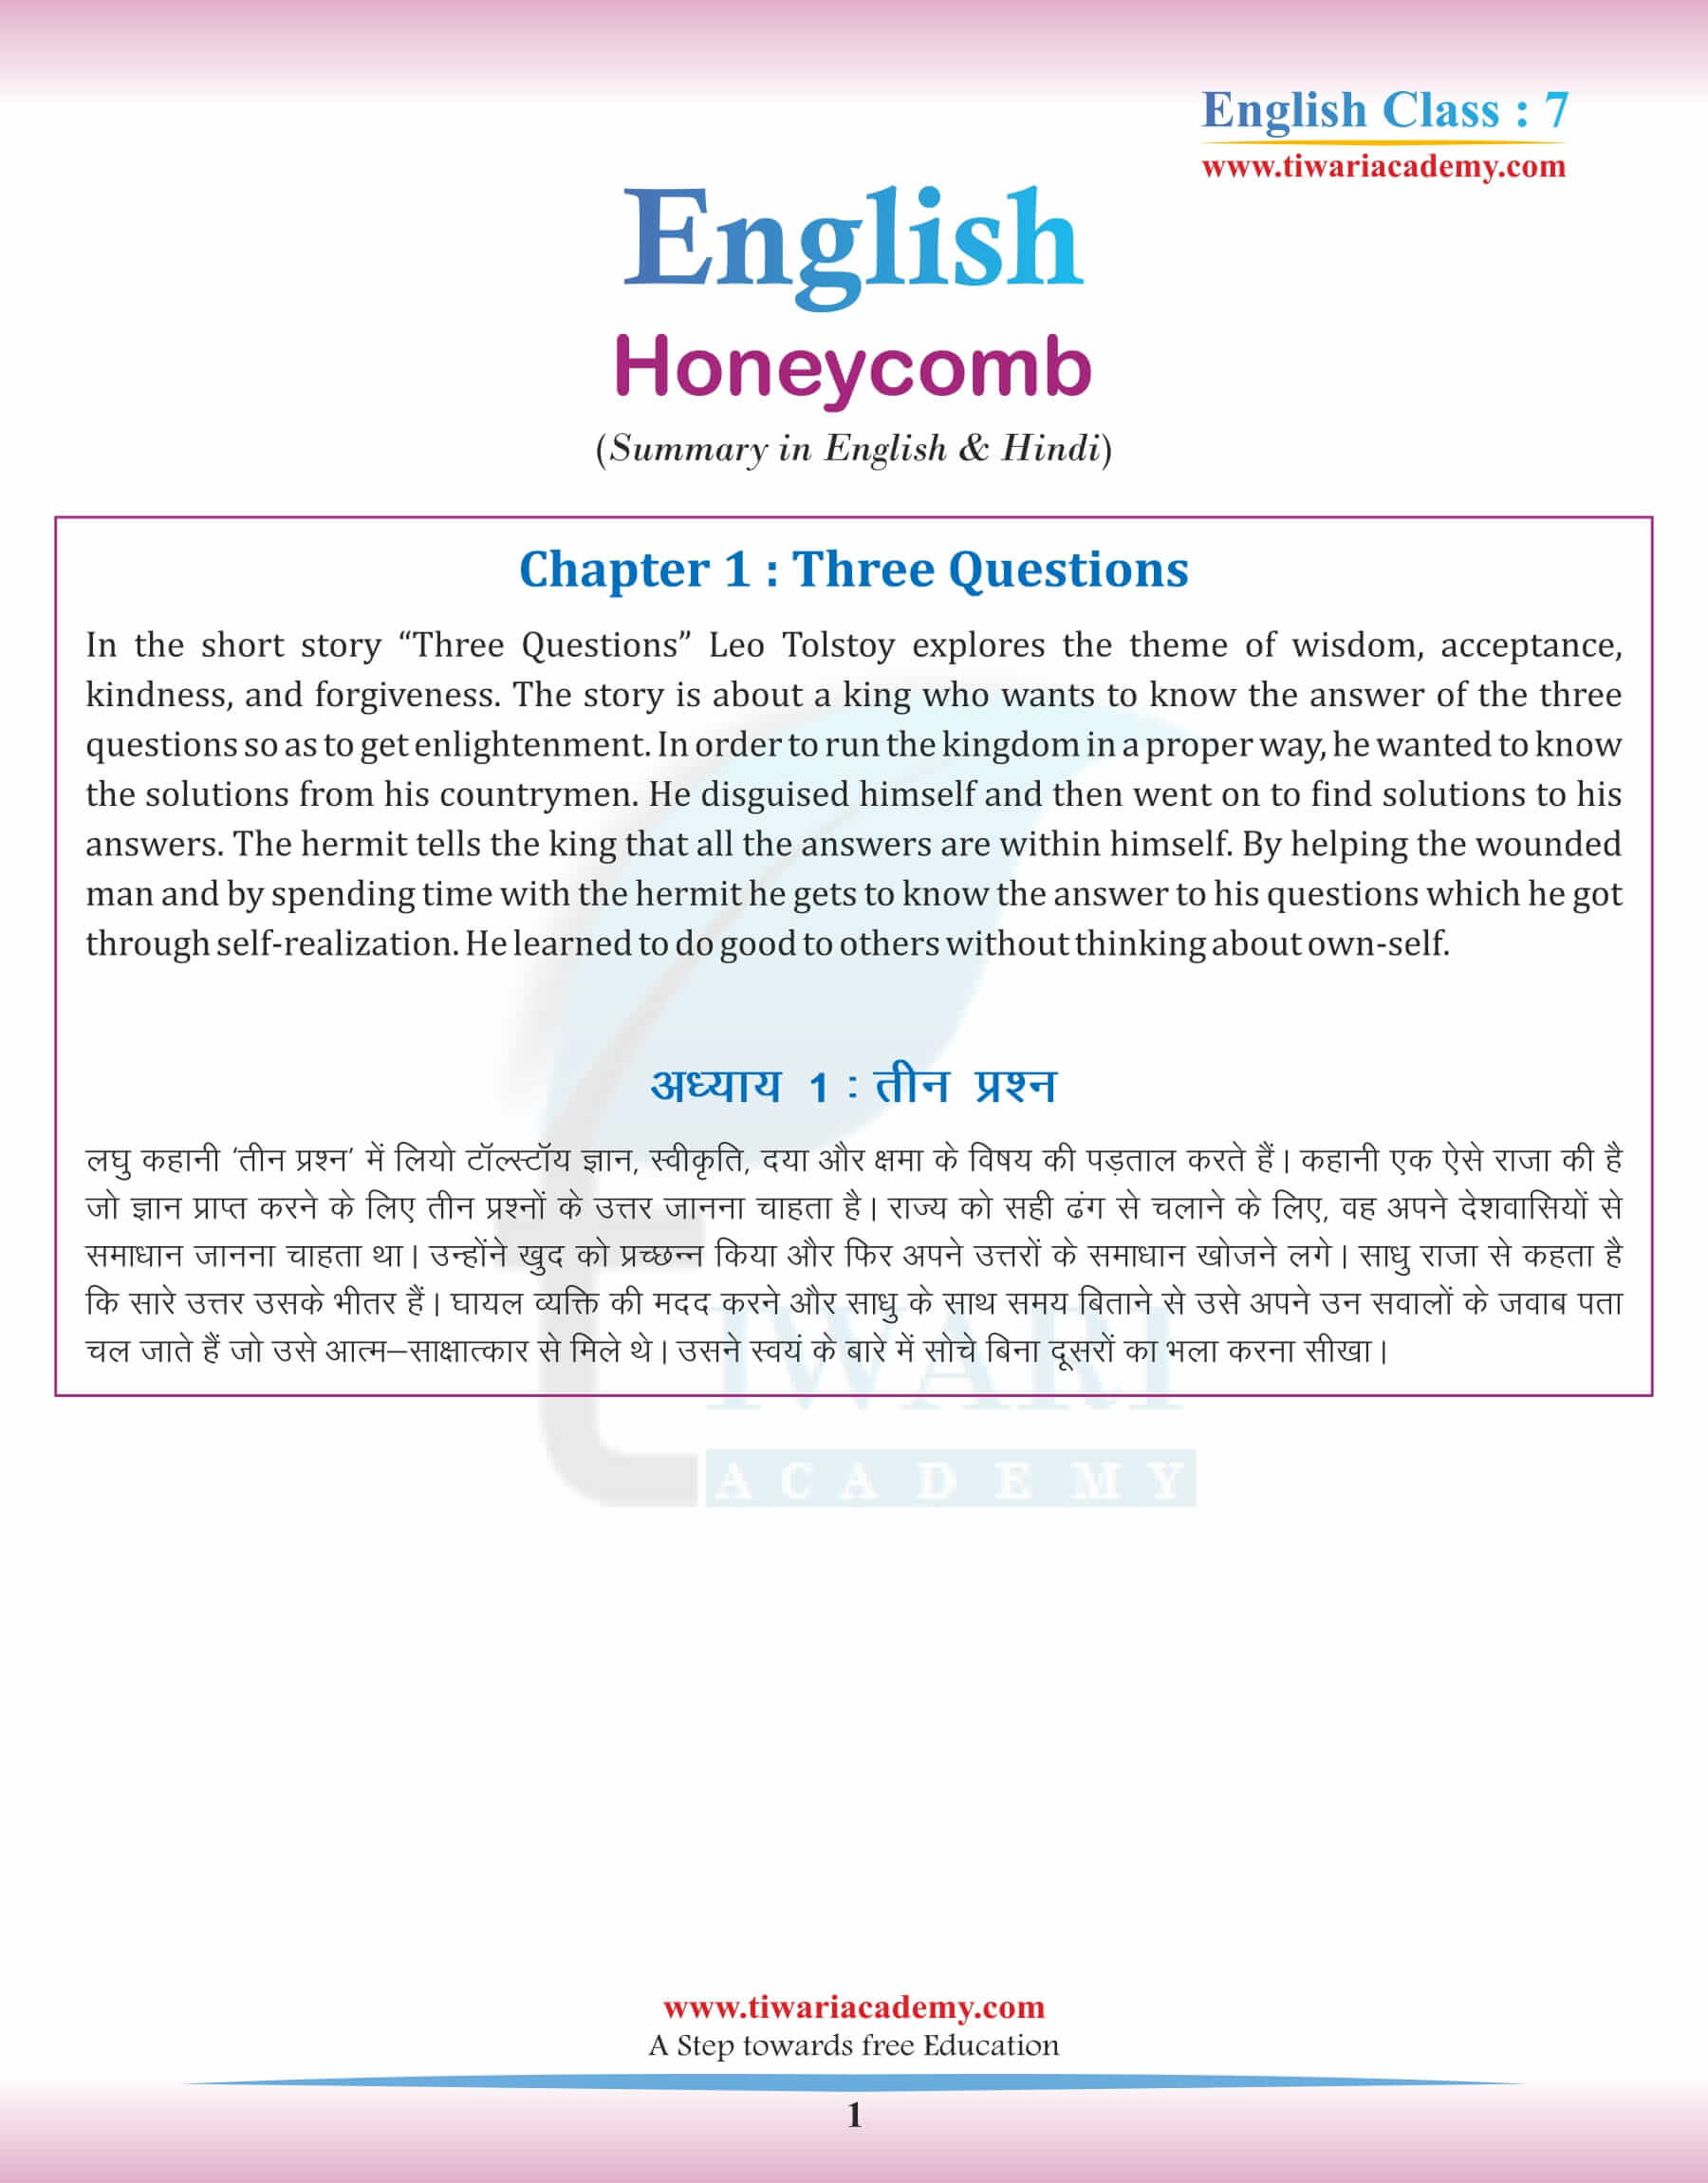 Class 7 English Chapter 1 Summary in Hindi and English